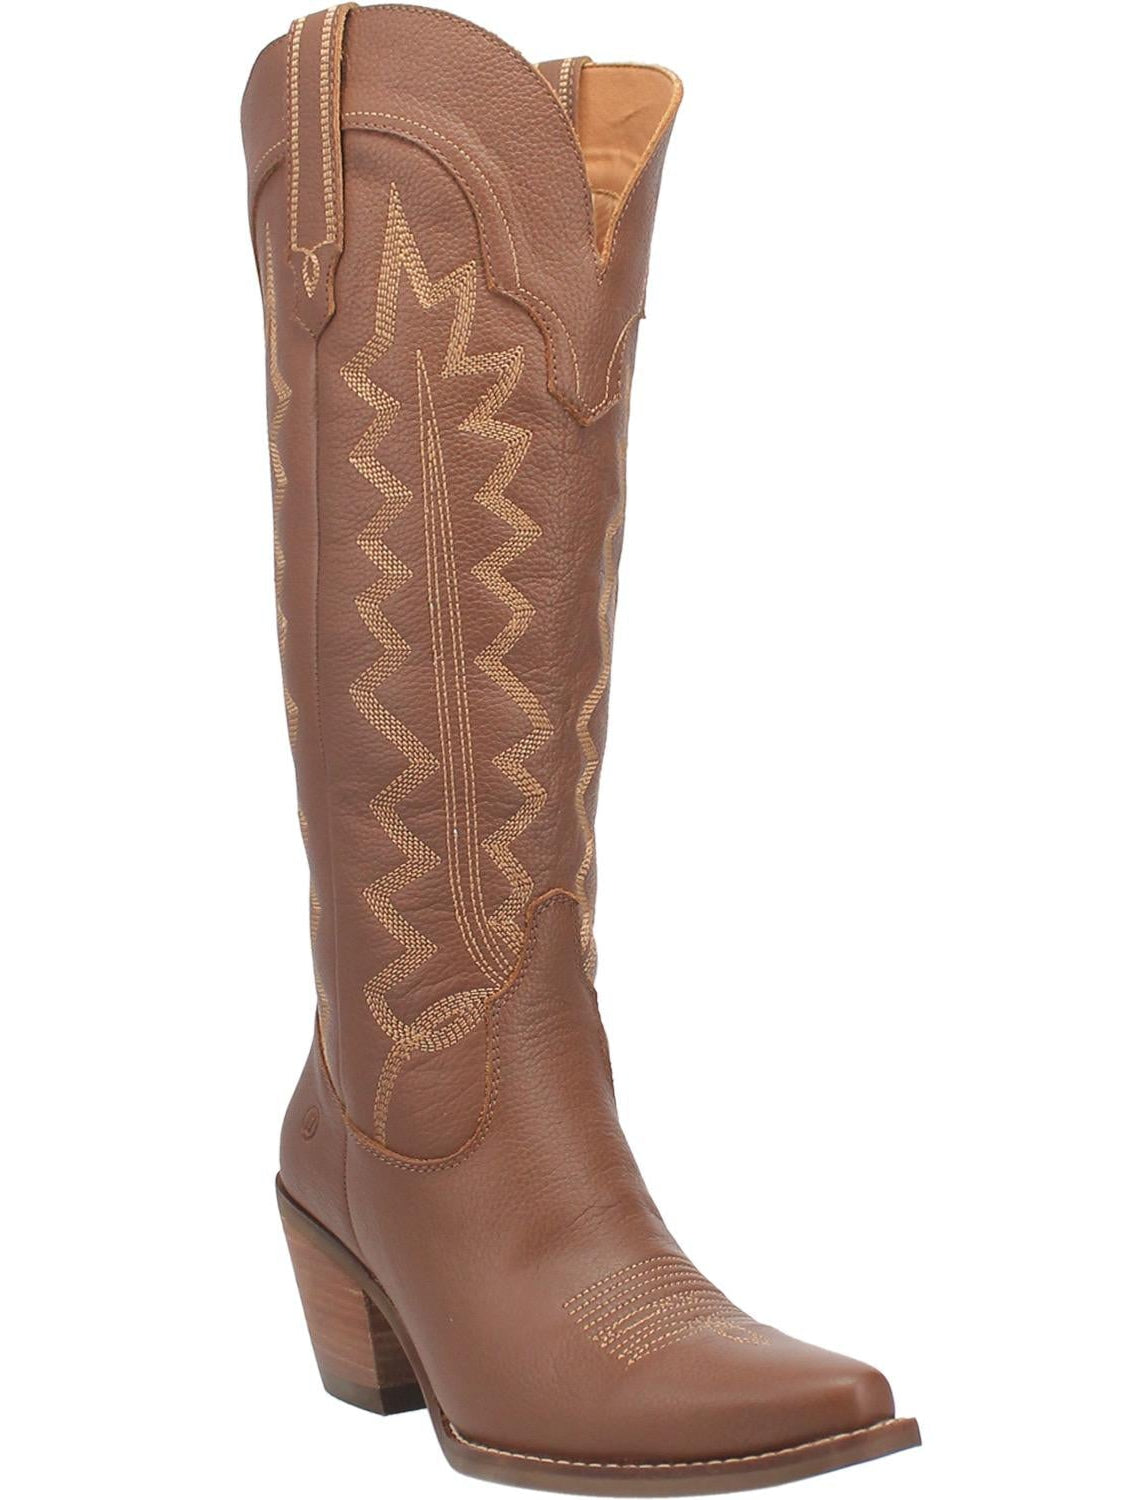 High Cotton Boot by Dingo from Dan Post - Brown